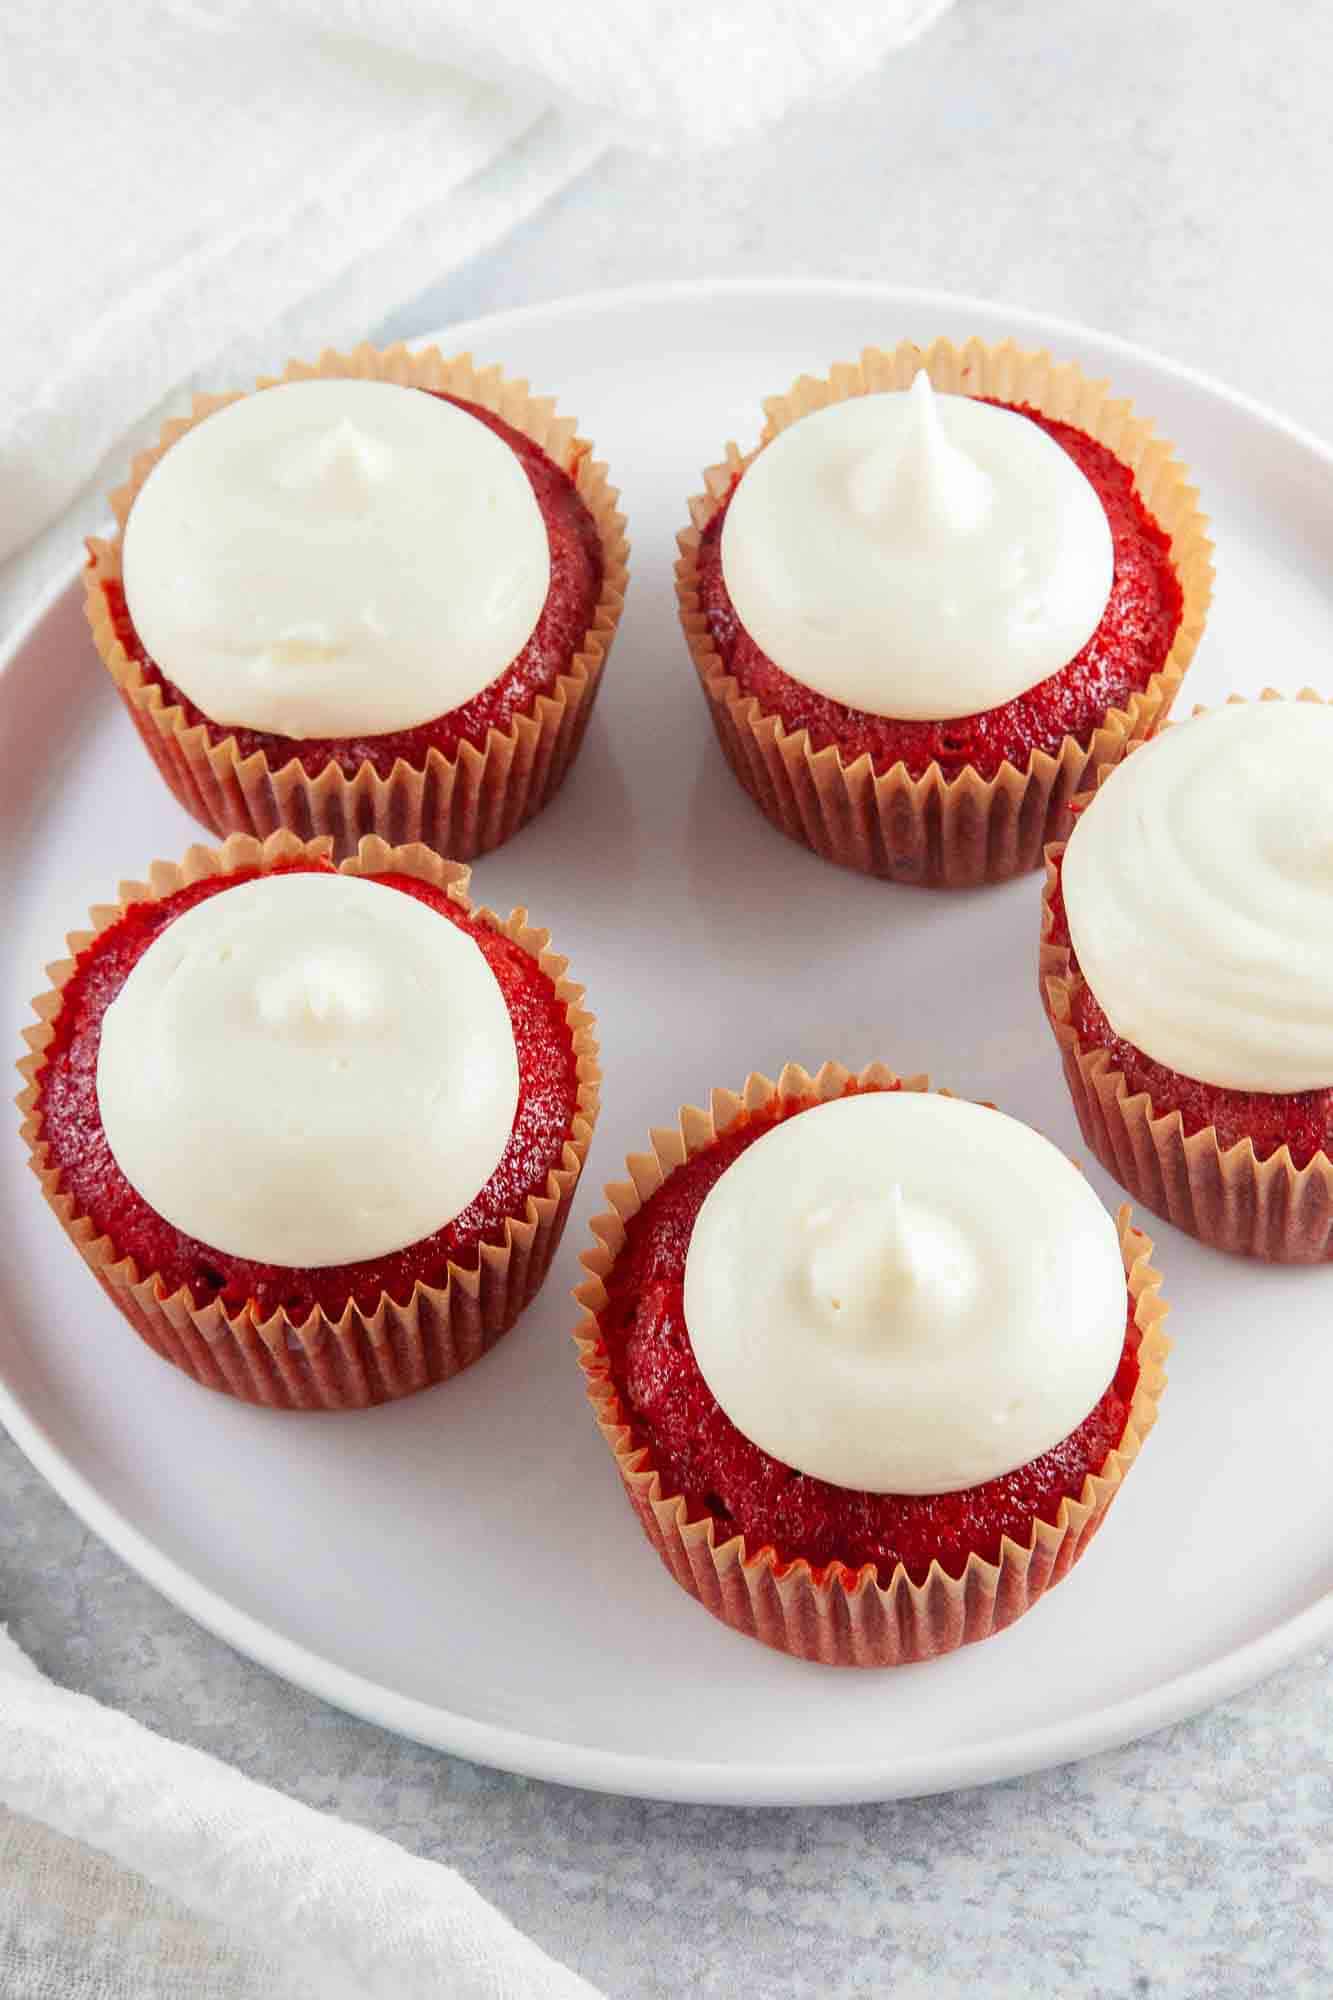 A plate with 5 Red Velvet Cupcakes